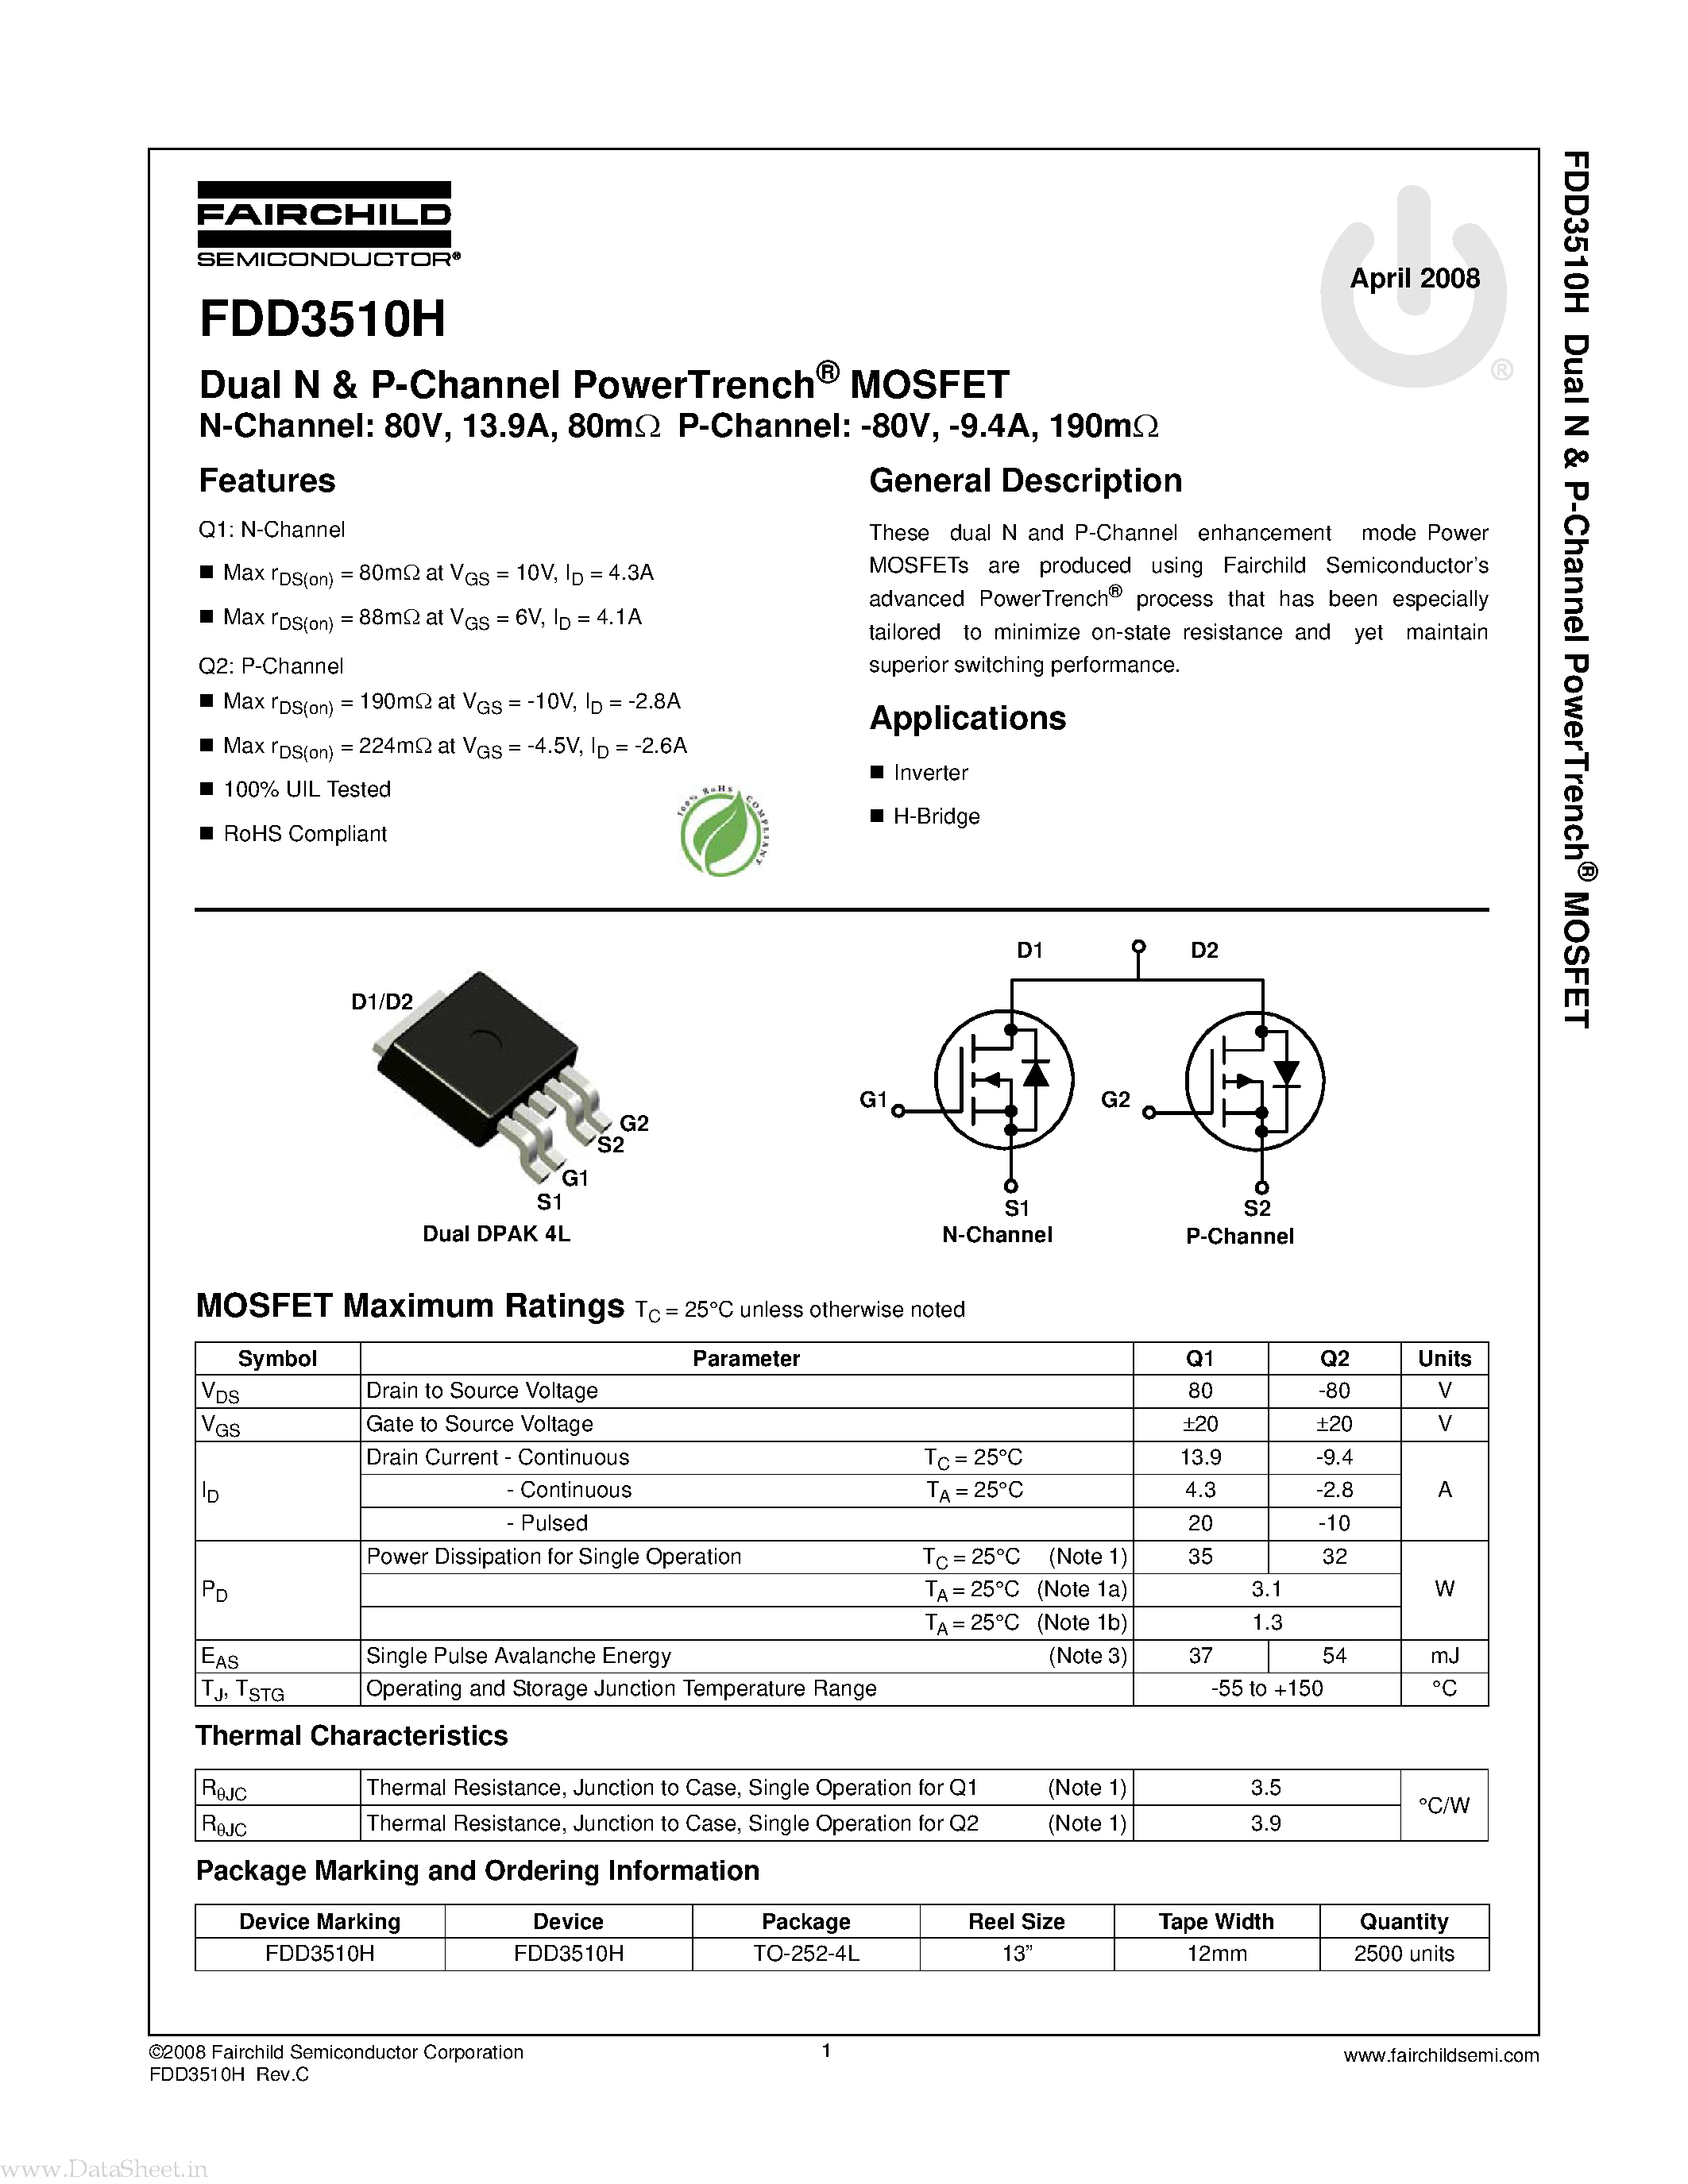 Даташит FDD3510H - Dual N & P-Channel PowerTrench MOSFET страница 1